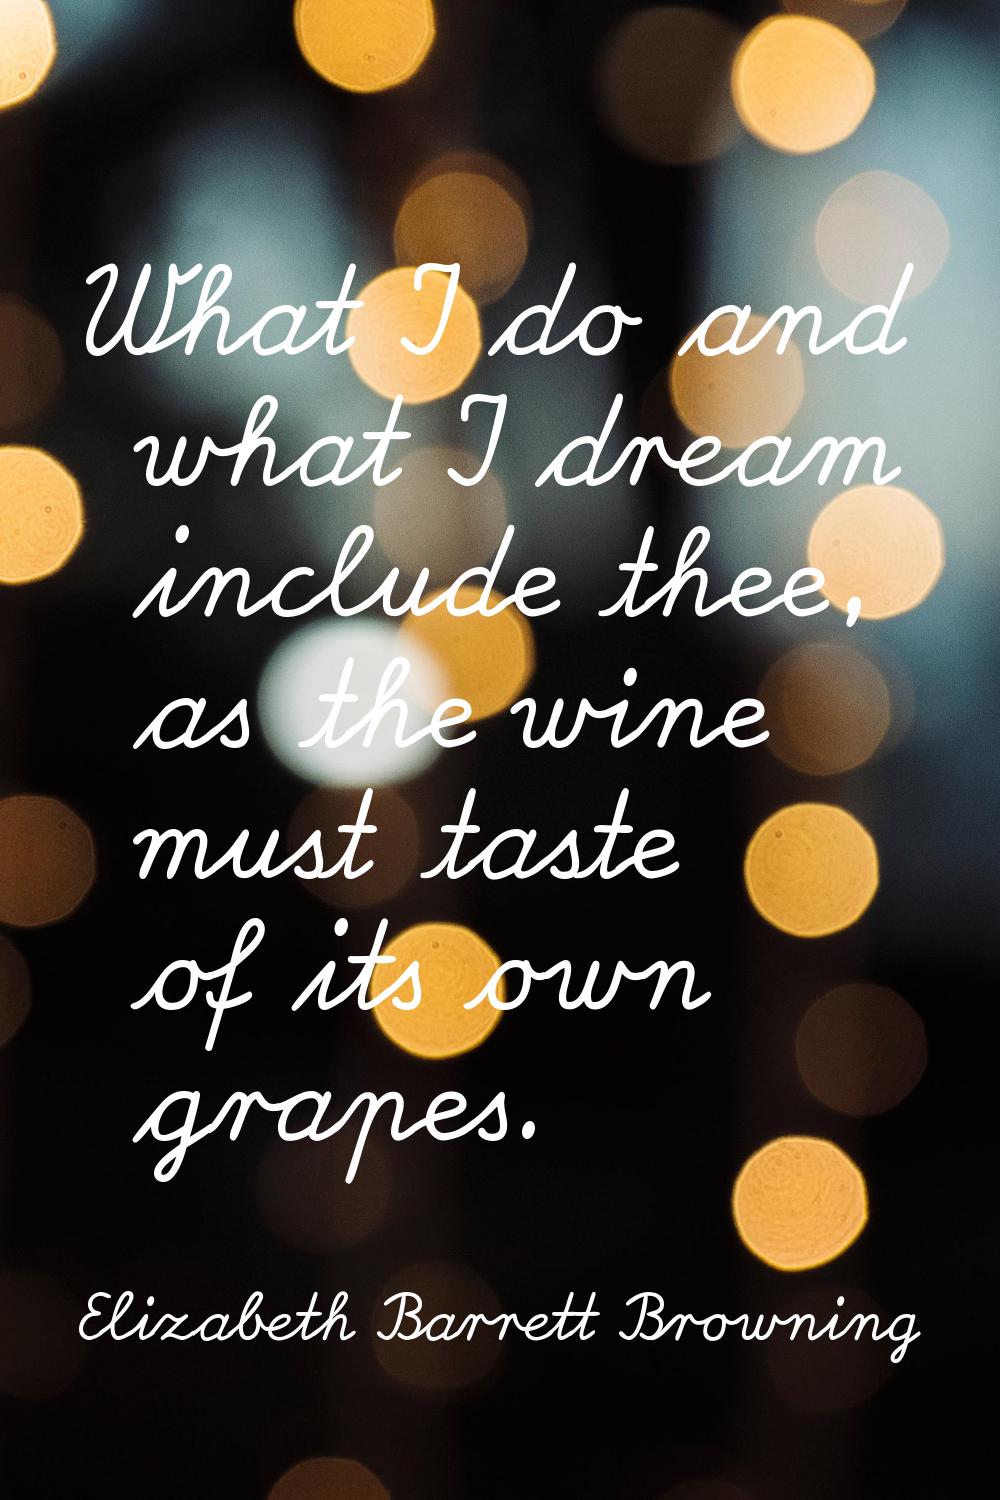 What I do and what I dream include thee, as the wine must taste of its own grapes.